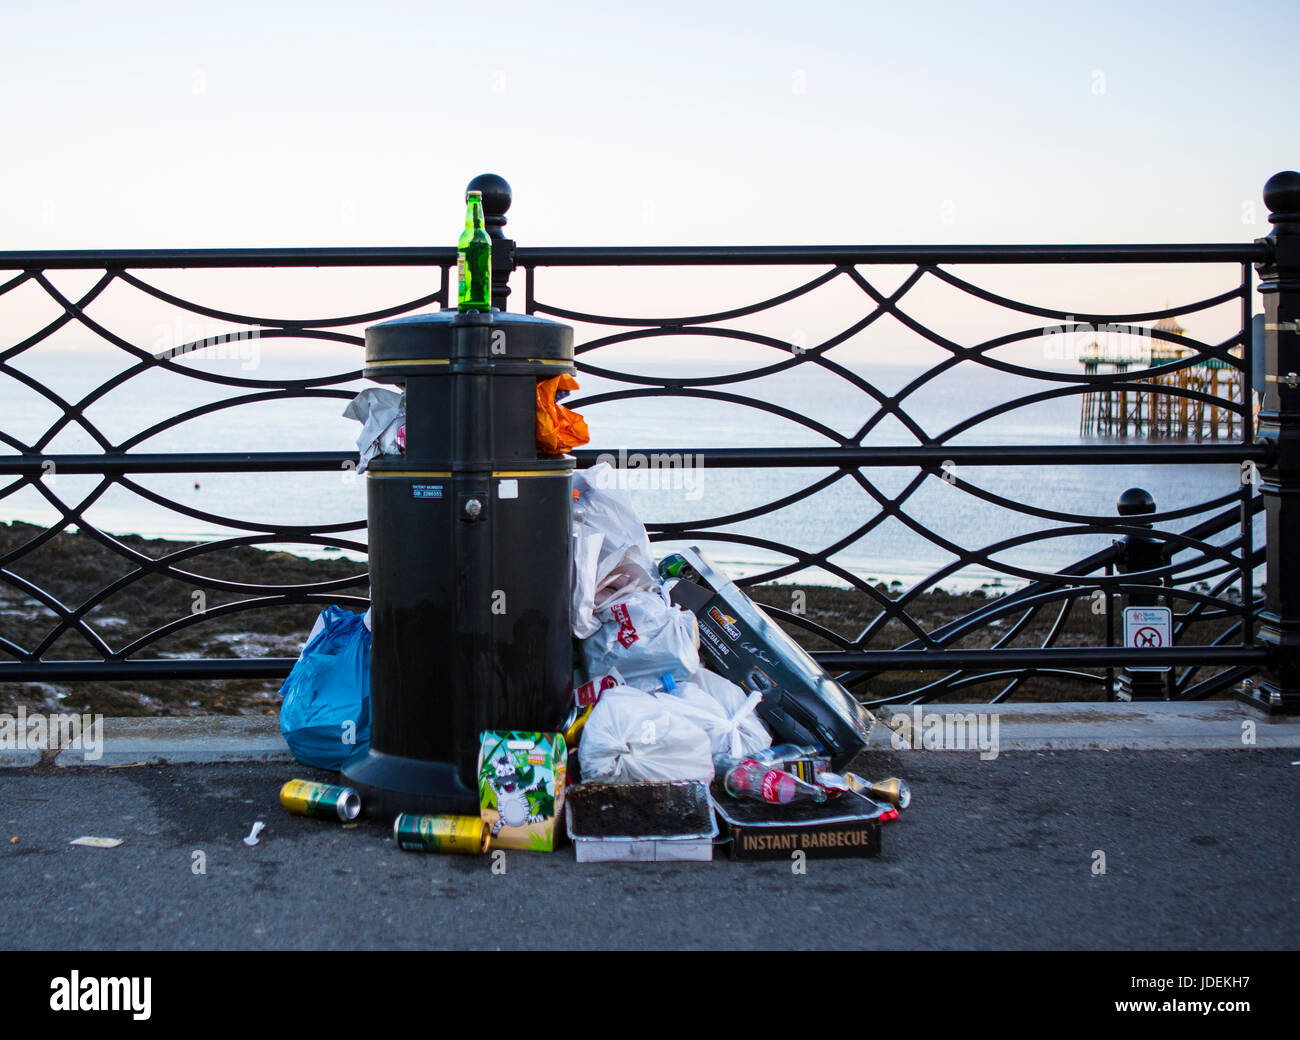 CLEVEDON, UK - JUNE 18, 2017: Overflowing rubish bin on Clevedon sea front in somerset Stock Photo